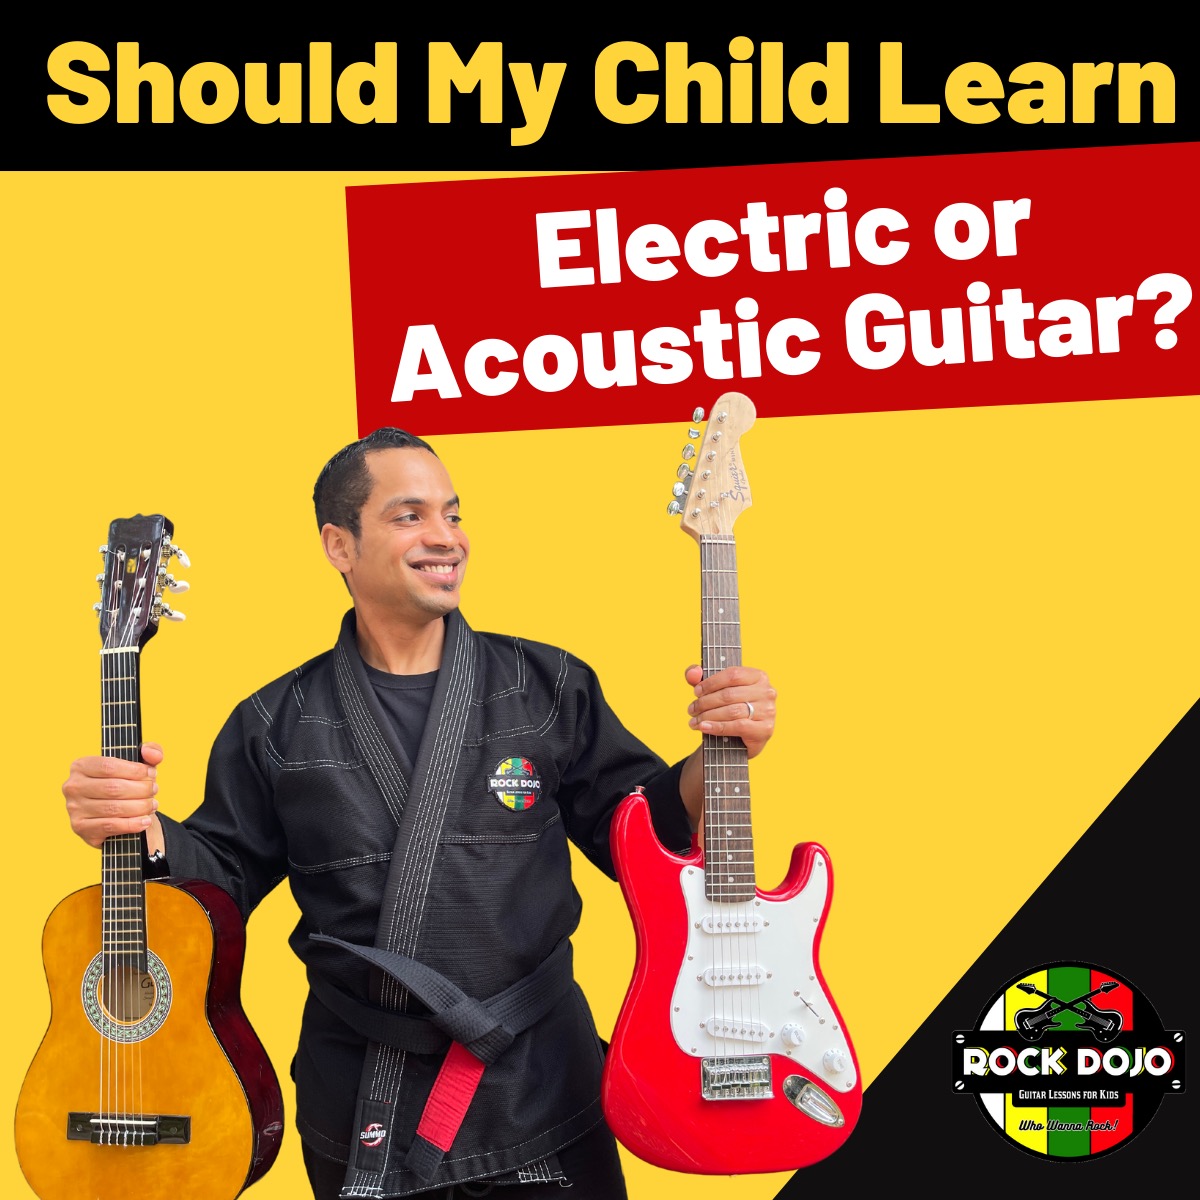 Should my child learn electric or acoustic guitar? Find out now.